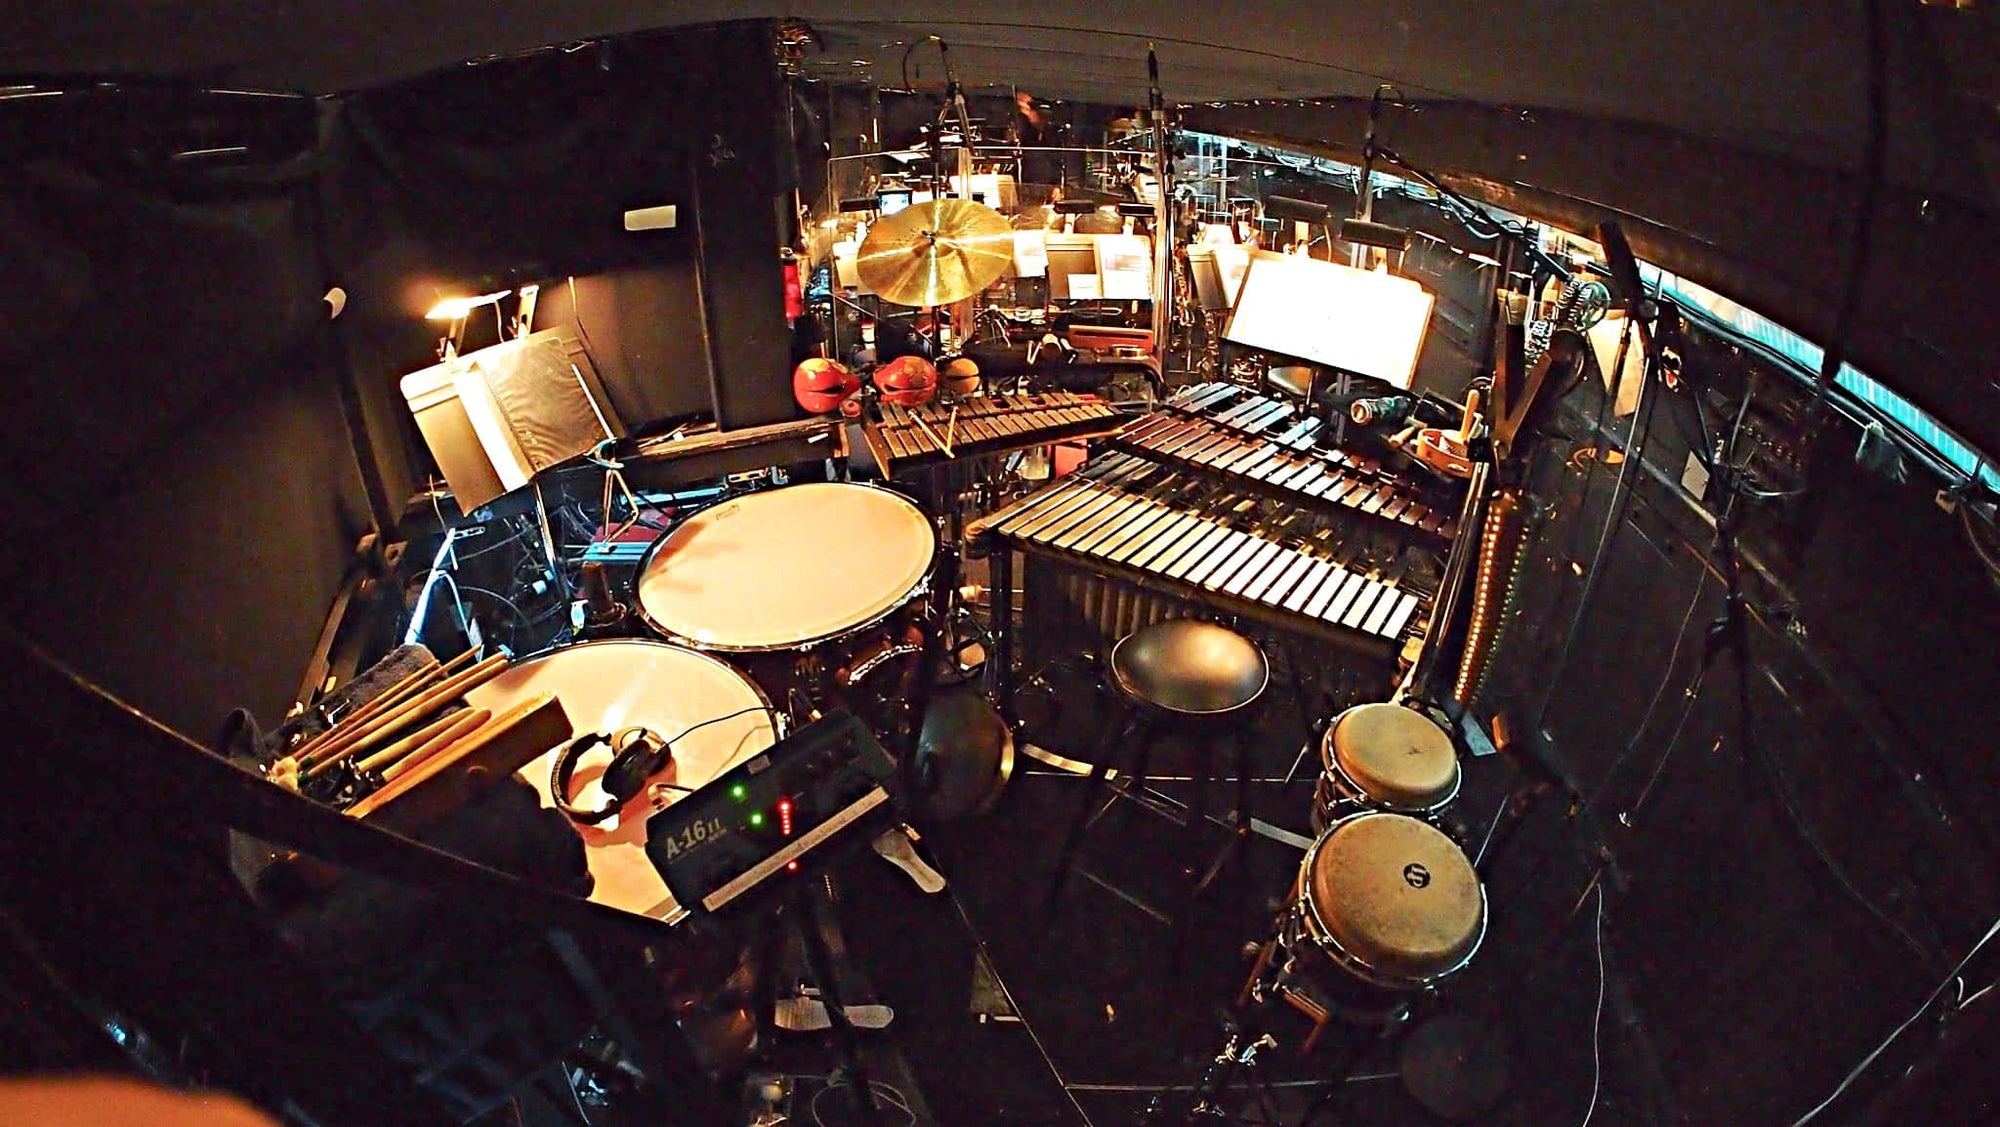 Paul Hansen’s percussion setup for Pajama Game at the 5th Avenue Theatre in Seattle, Washington.